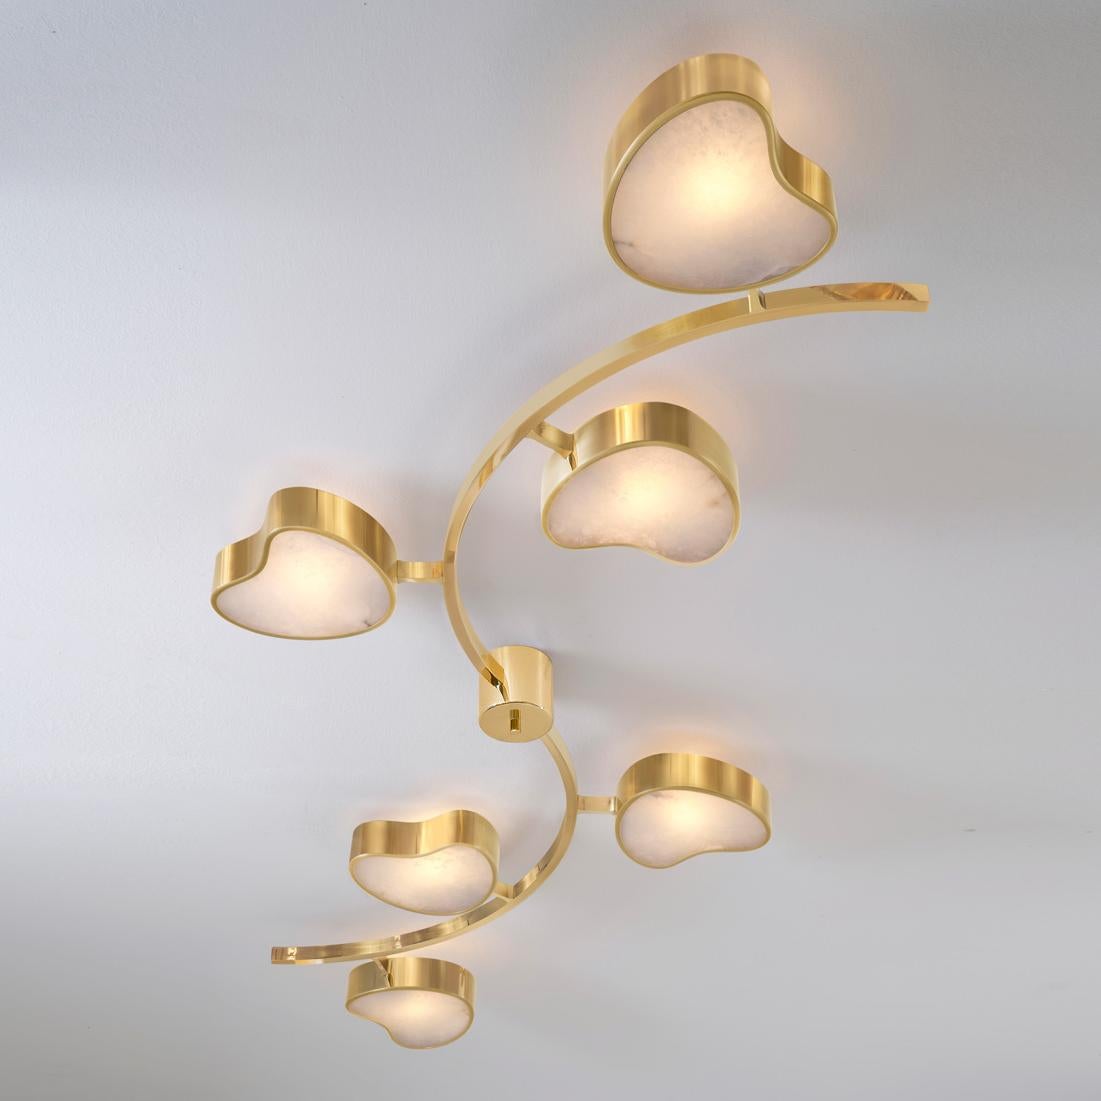 Cuore N.6 Ceiling Light by Gaspare Asaro. Peltro and Bronze Finish For Sale 1